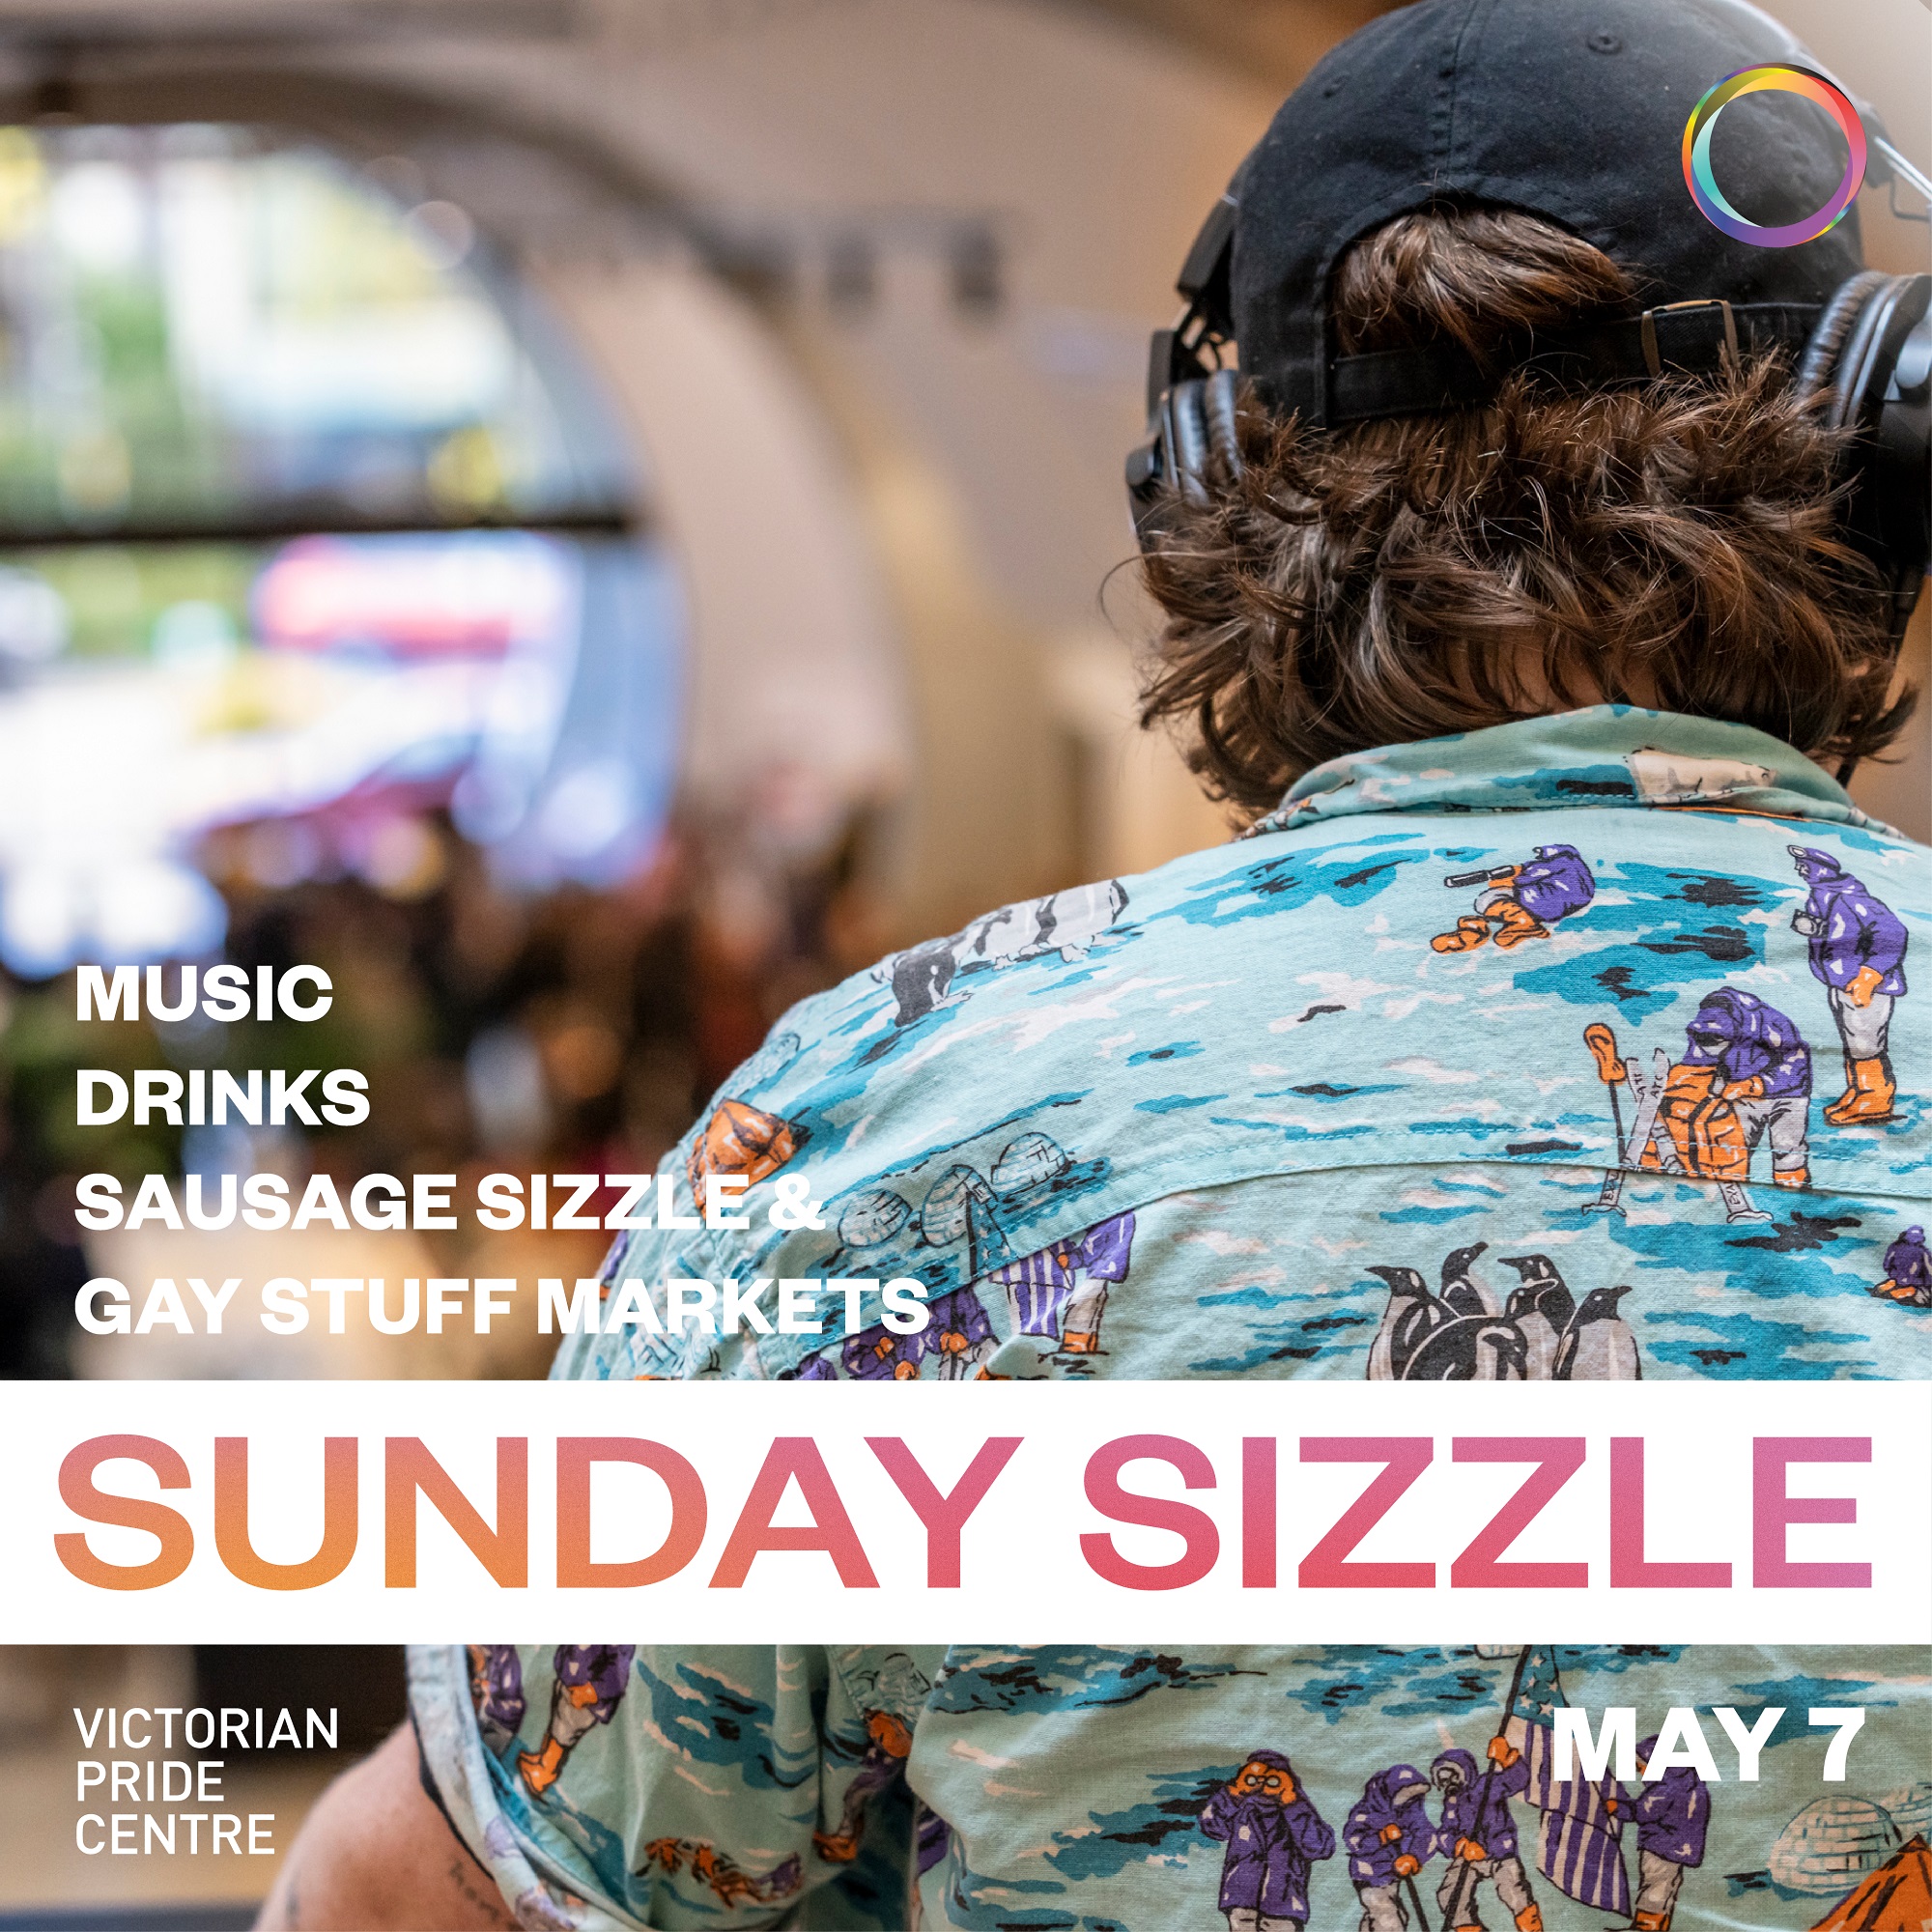 Music, drinks, sausage sizzle, Gay Stuff Markets. Sunday Sizzle, May 7.